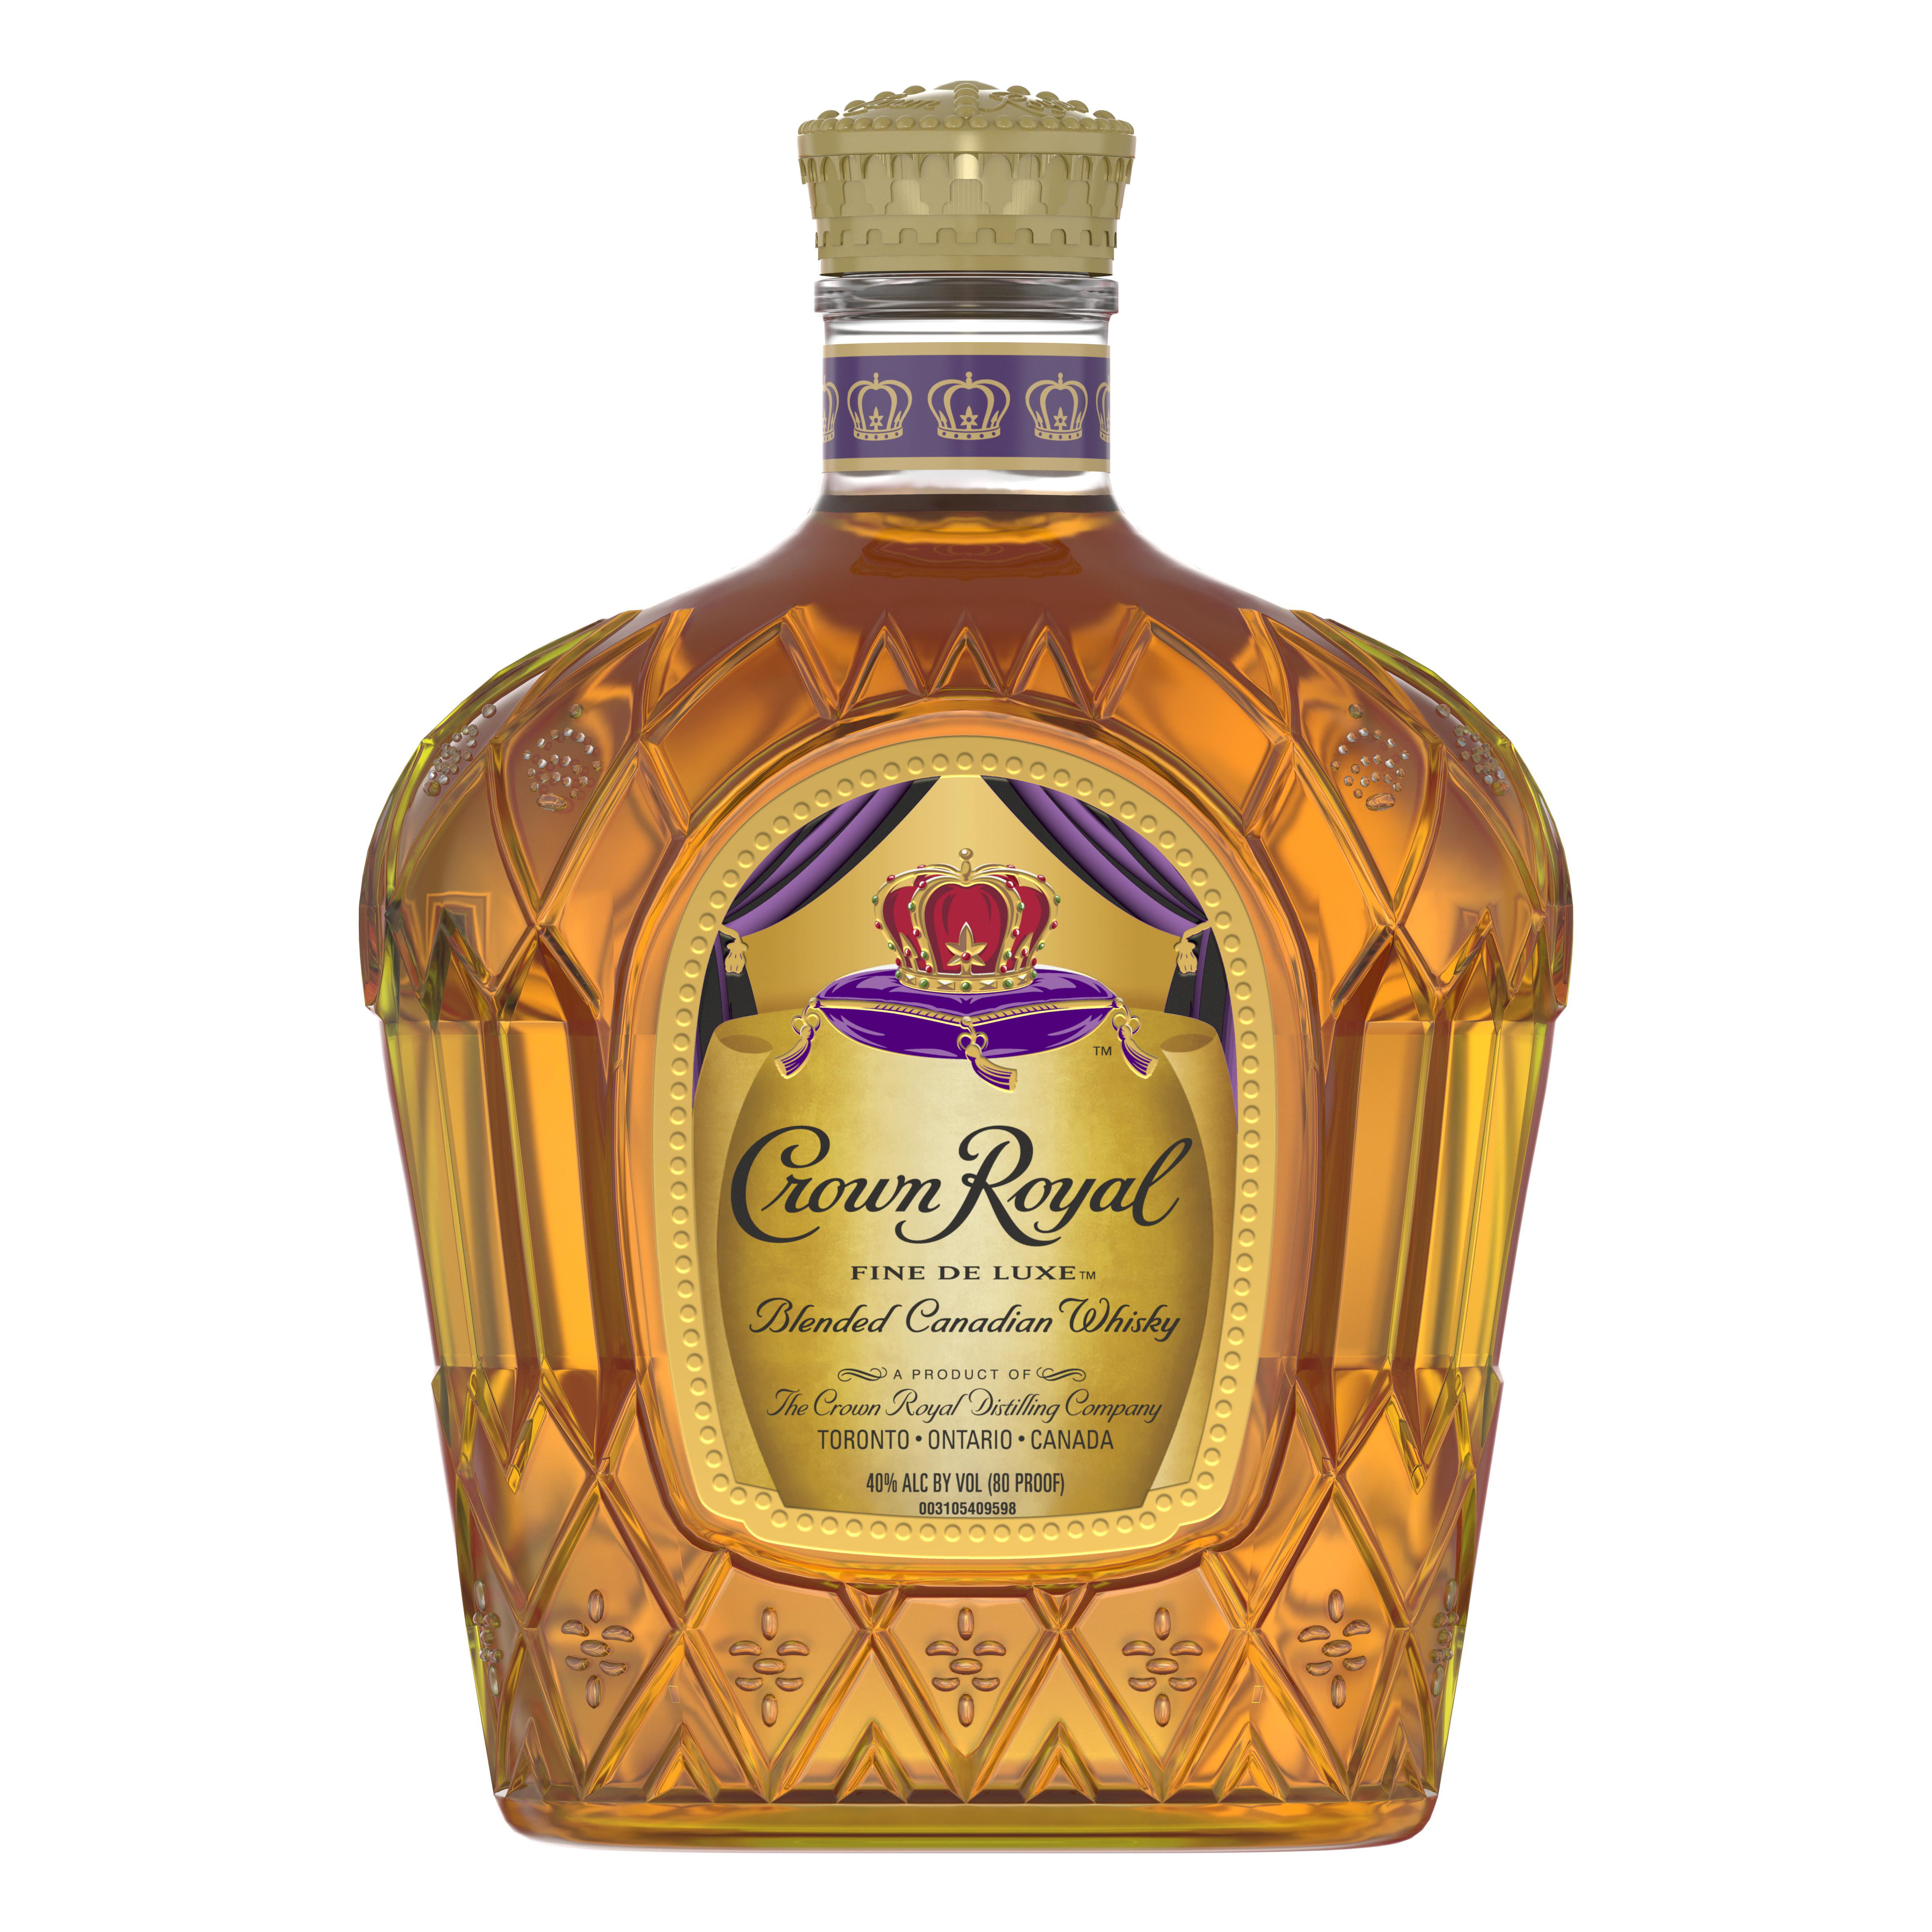 crown-royal-fine-deluxe-blended-canadian-whisky-750-ml-walmart